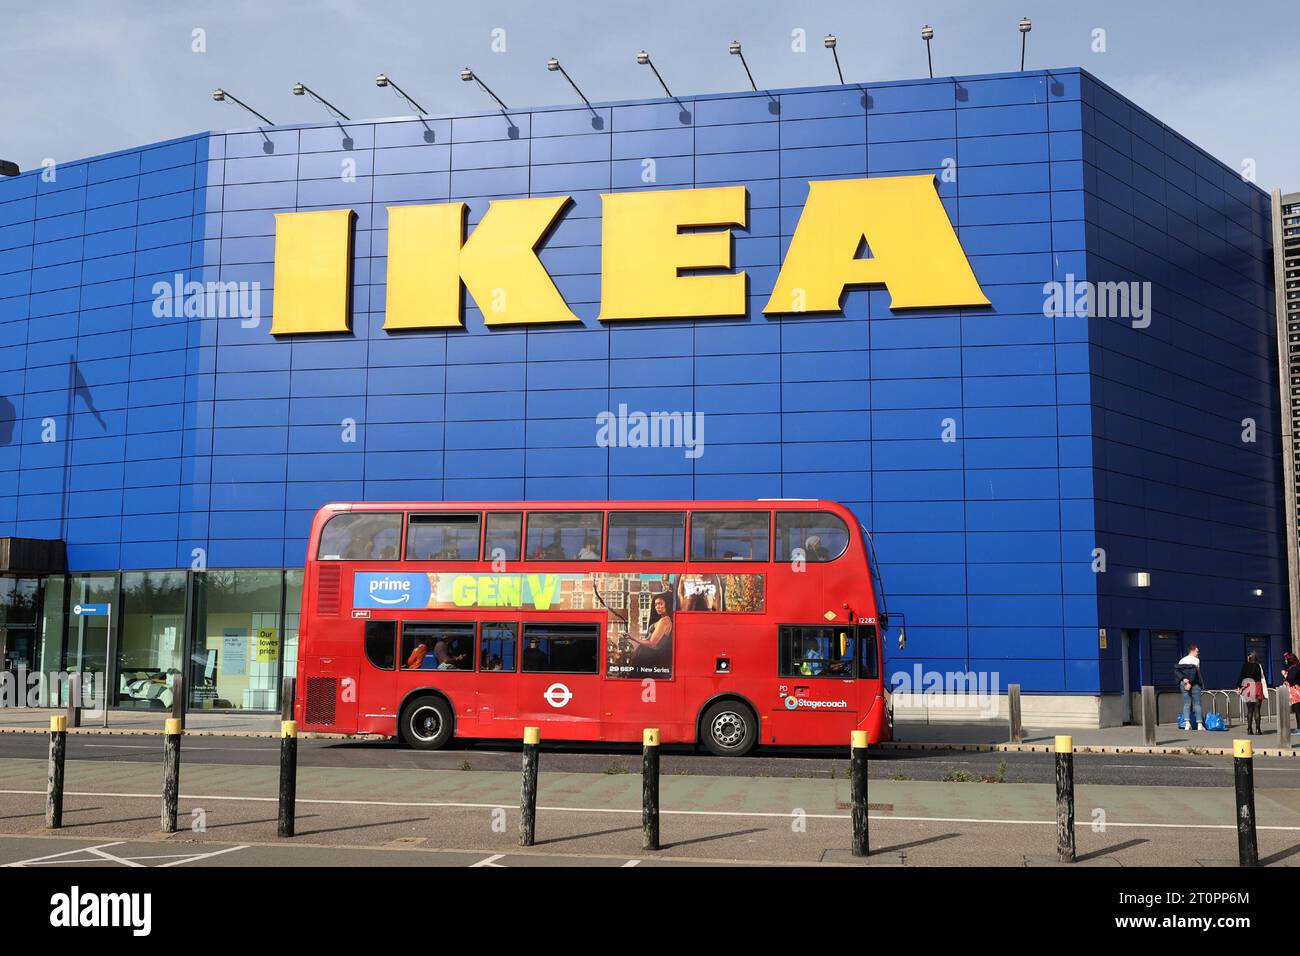 Public bus in front of the IKEA store in Greenwich, London, UK Stock Photo